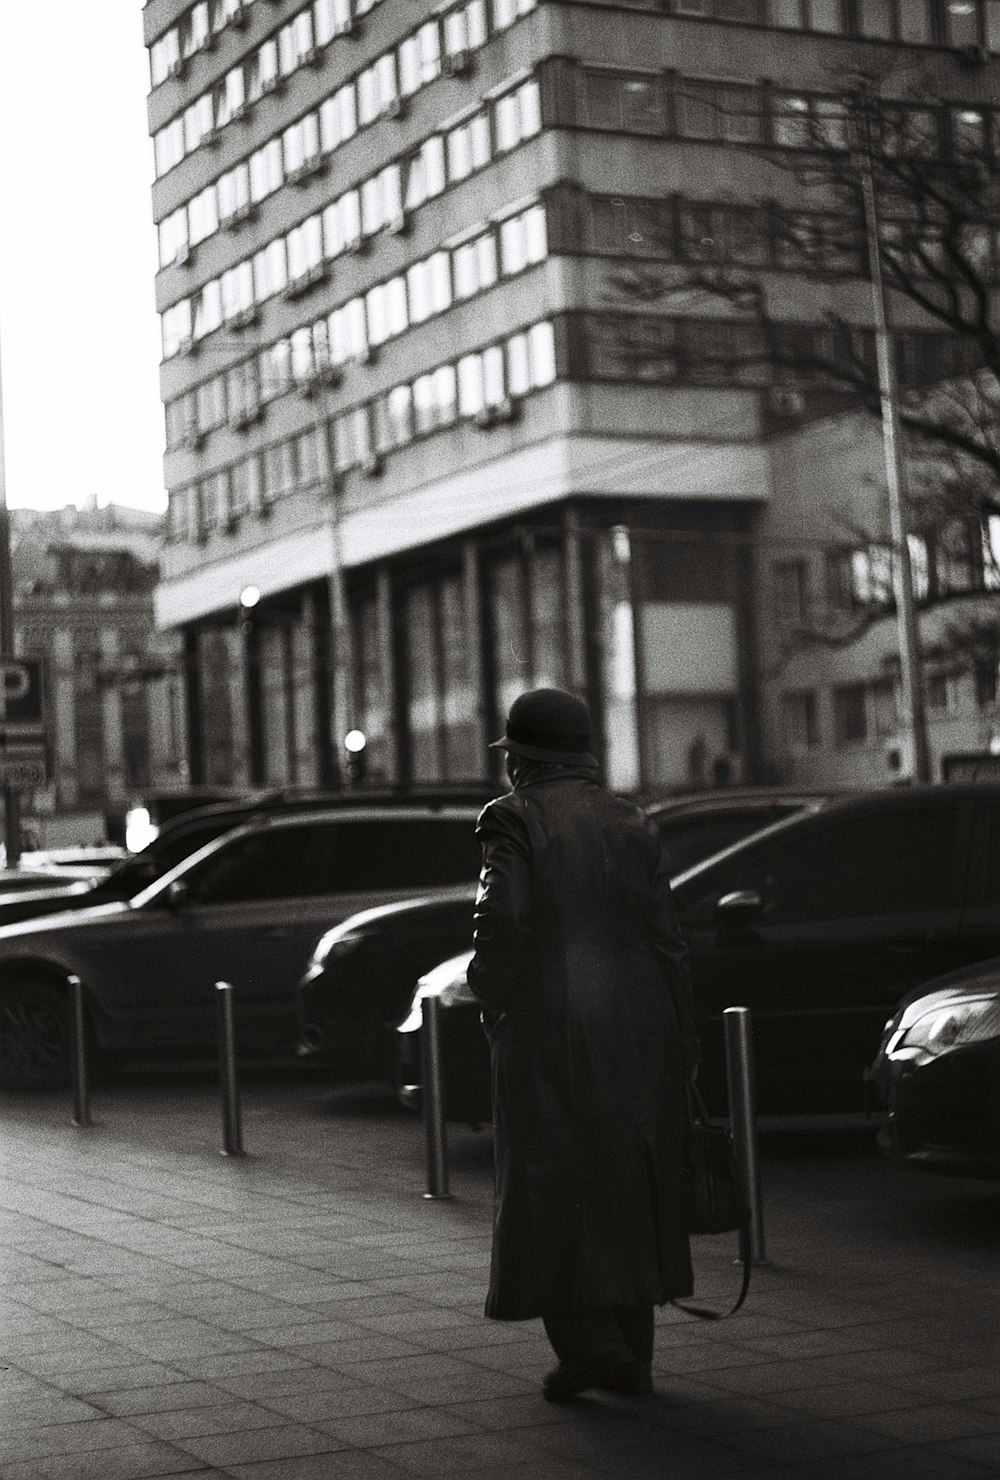 man in black coat standing near cars in grayscale photography